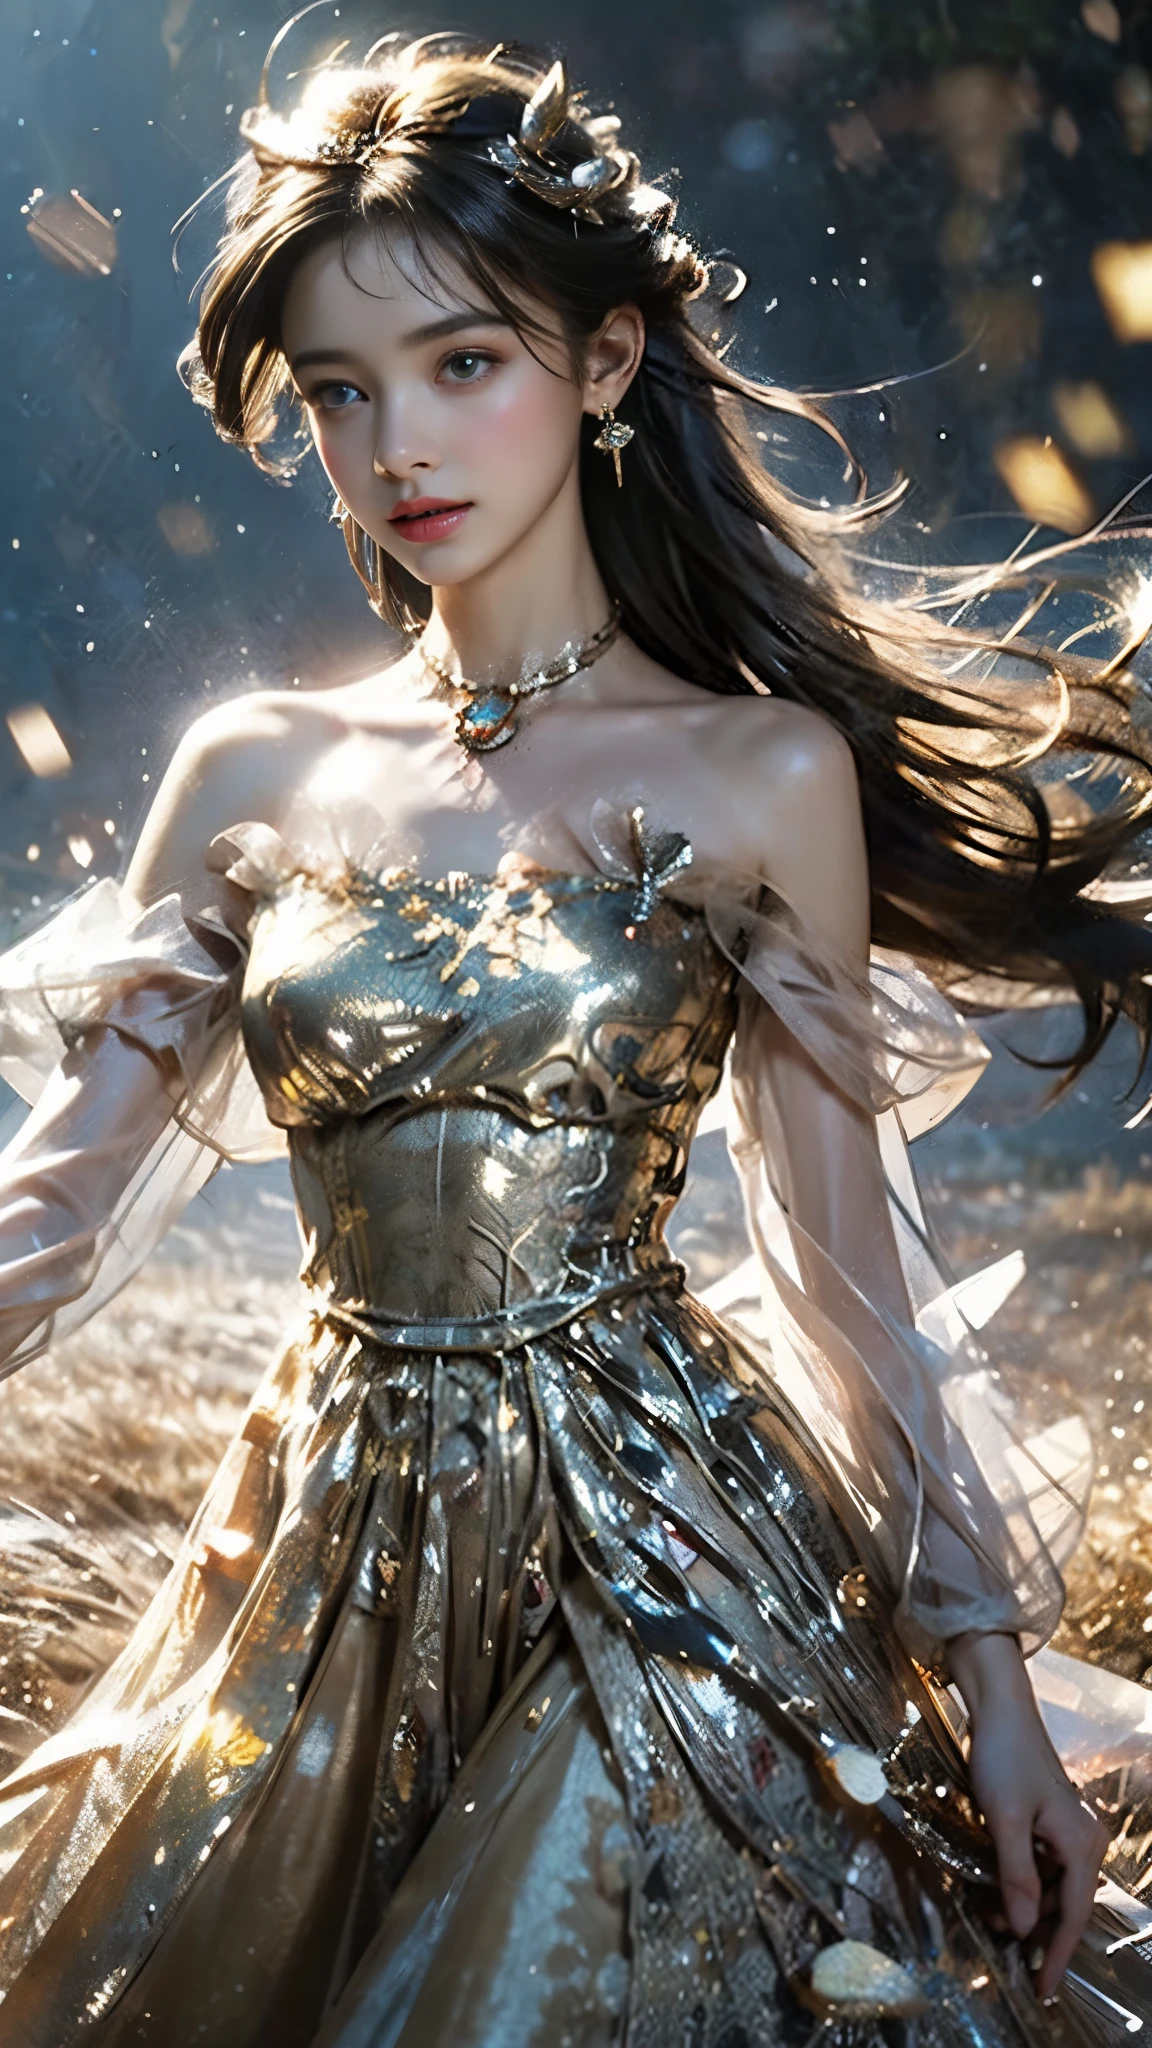 8K, ultra hd, masterpiece, 1 girl, (good face:1.4), detailed eyes, very long hair, impressive hairstyle, earings, necklace, small breasts, (golden dress:1.5), see-through, (fantasy dress:1.5) Light-colored foundation brings out the transparency of the skin, (in the wonderland:1.5), mystery, diwali lights, glowing lights, very decoration, The lights falls like water, perfect front body,